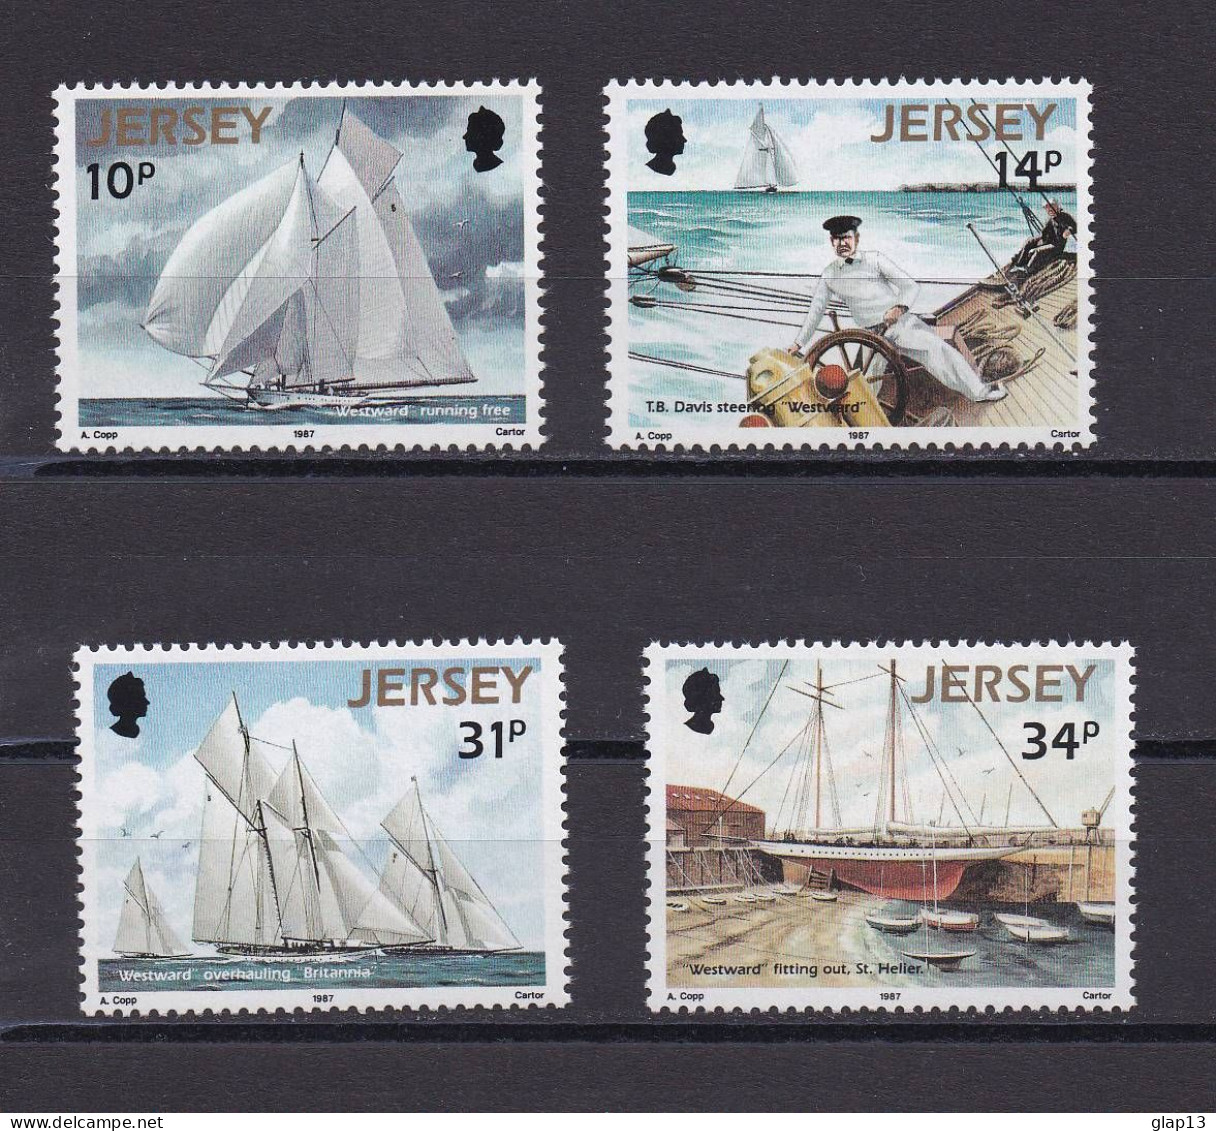 JERSEY 1987 TIMBRE N°390/93 NEUF** BATEAUX - Jersey